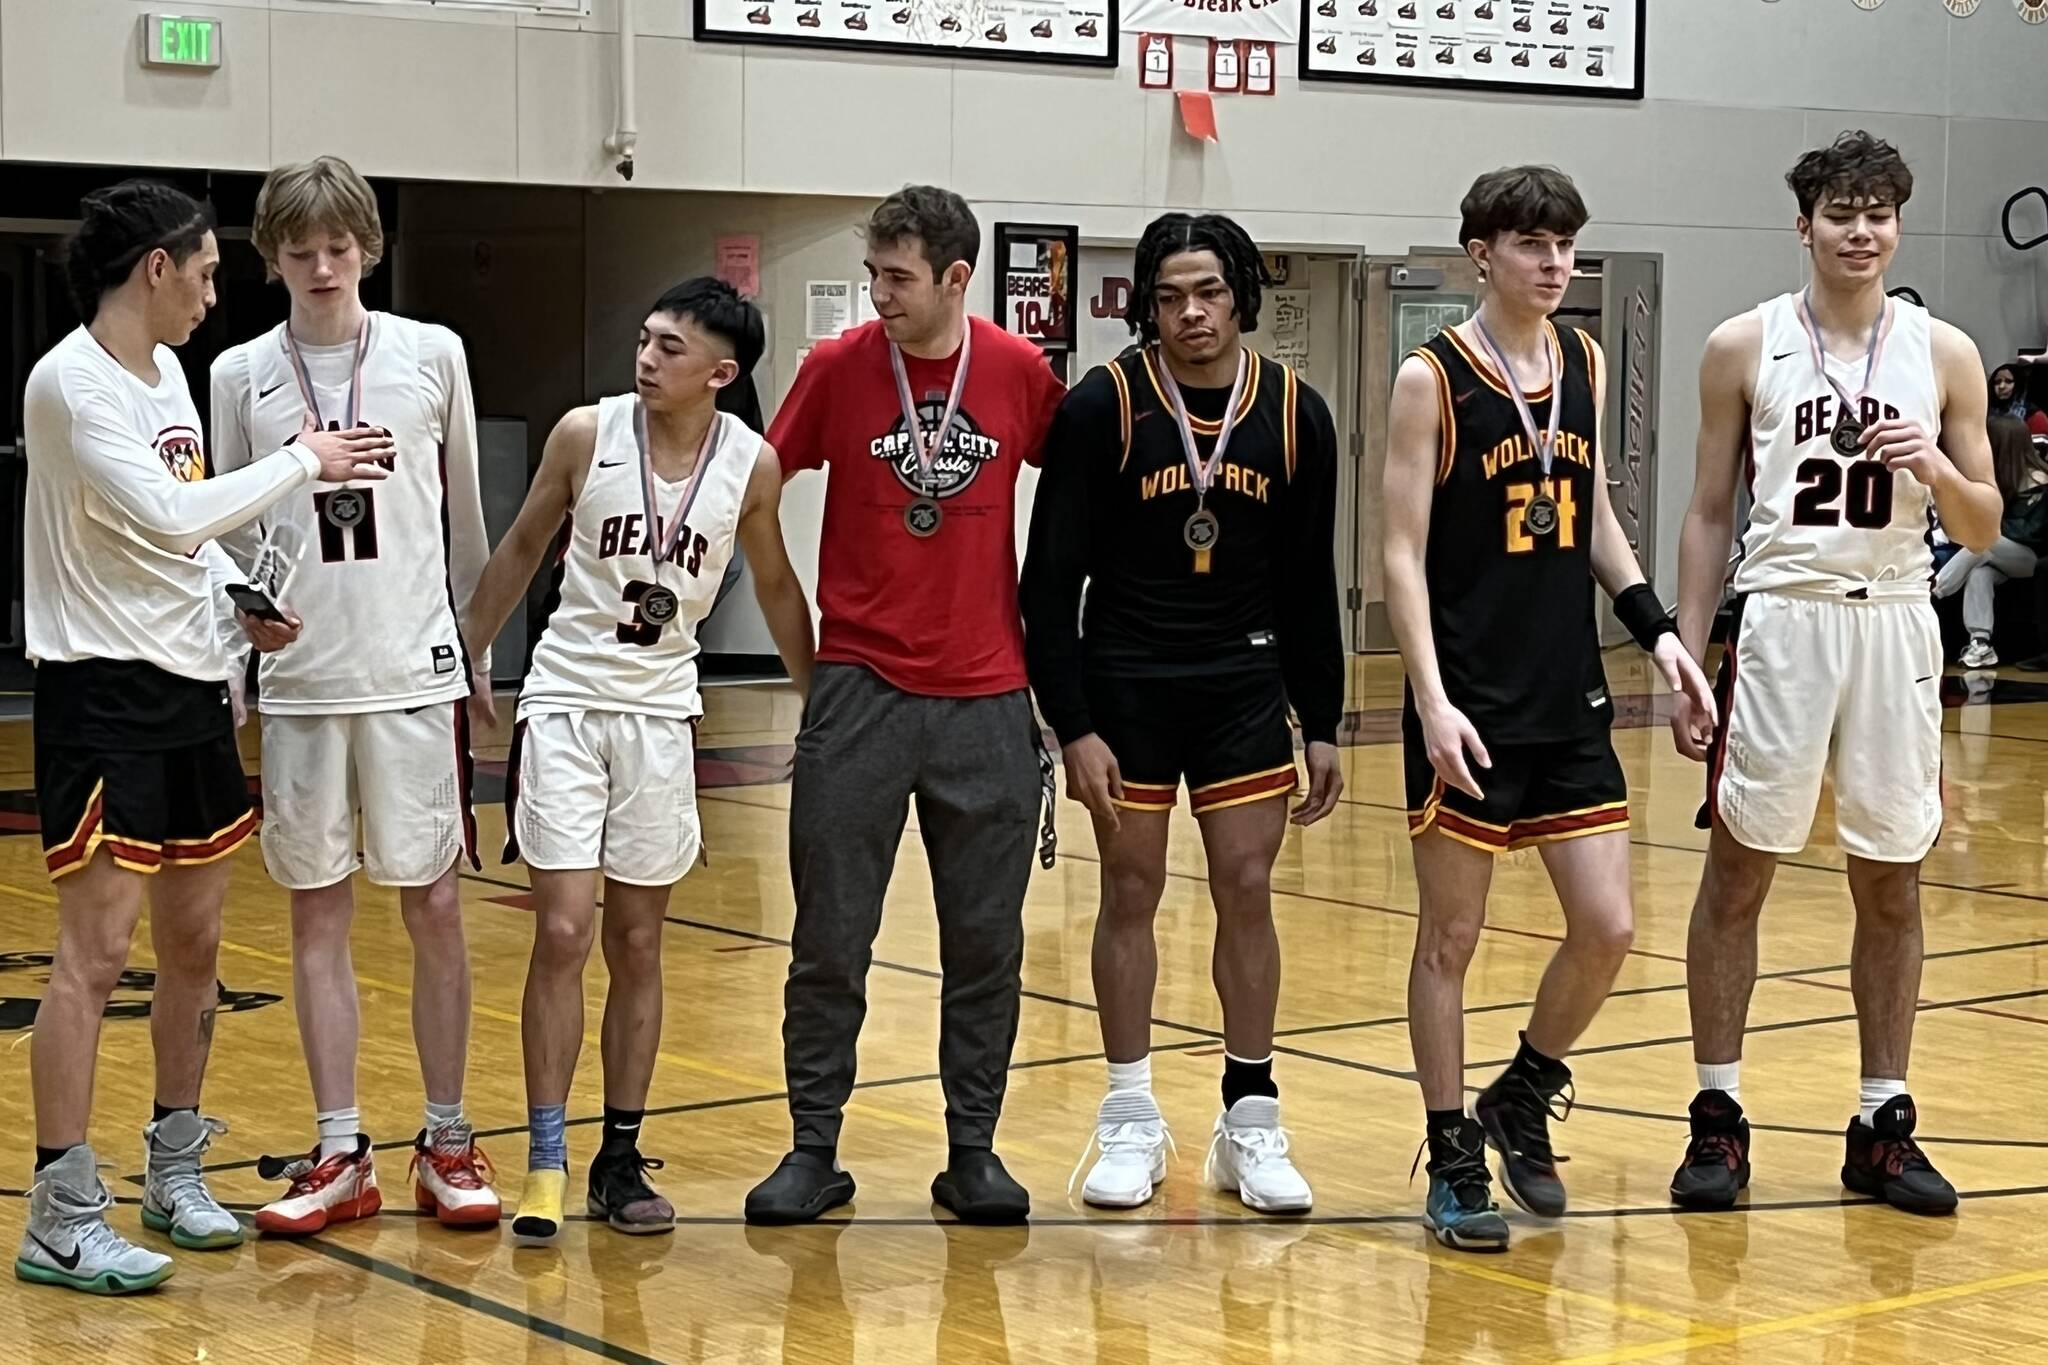 For the JDHS boys, Sean Oliver, Alwen Carrillo and Orion Dybdahl each earned all-tournament honors during the Capital City Classic awards ceremony. (Jonson Kuhn / Juneau Empire)